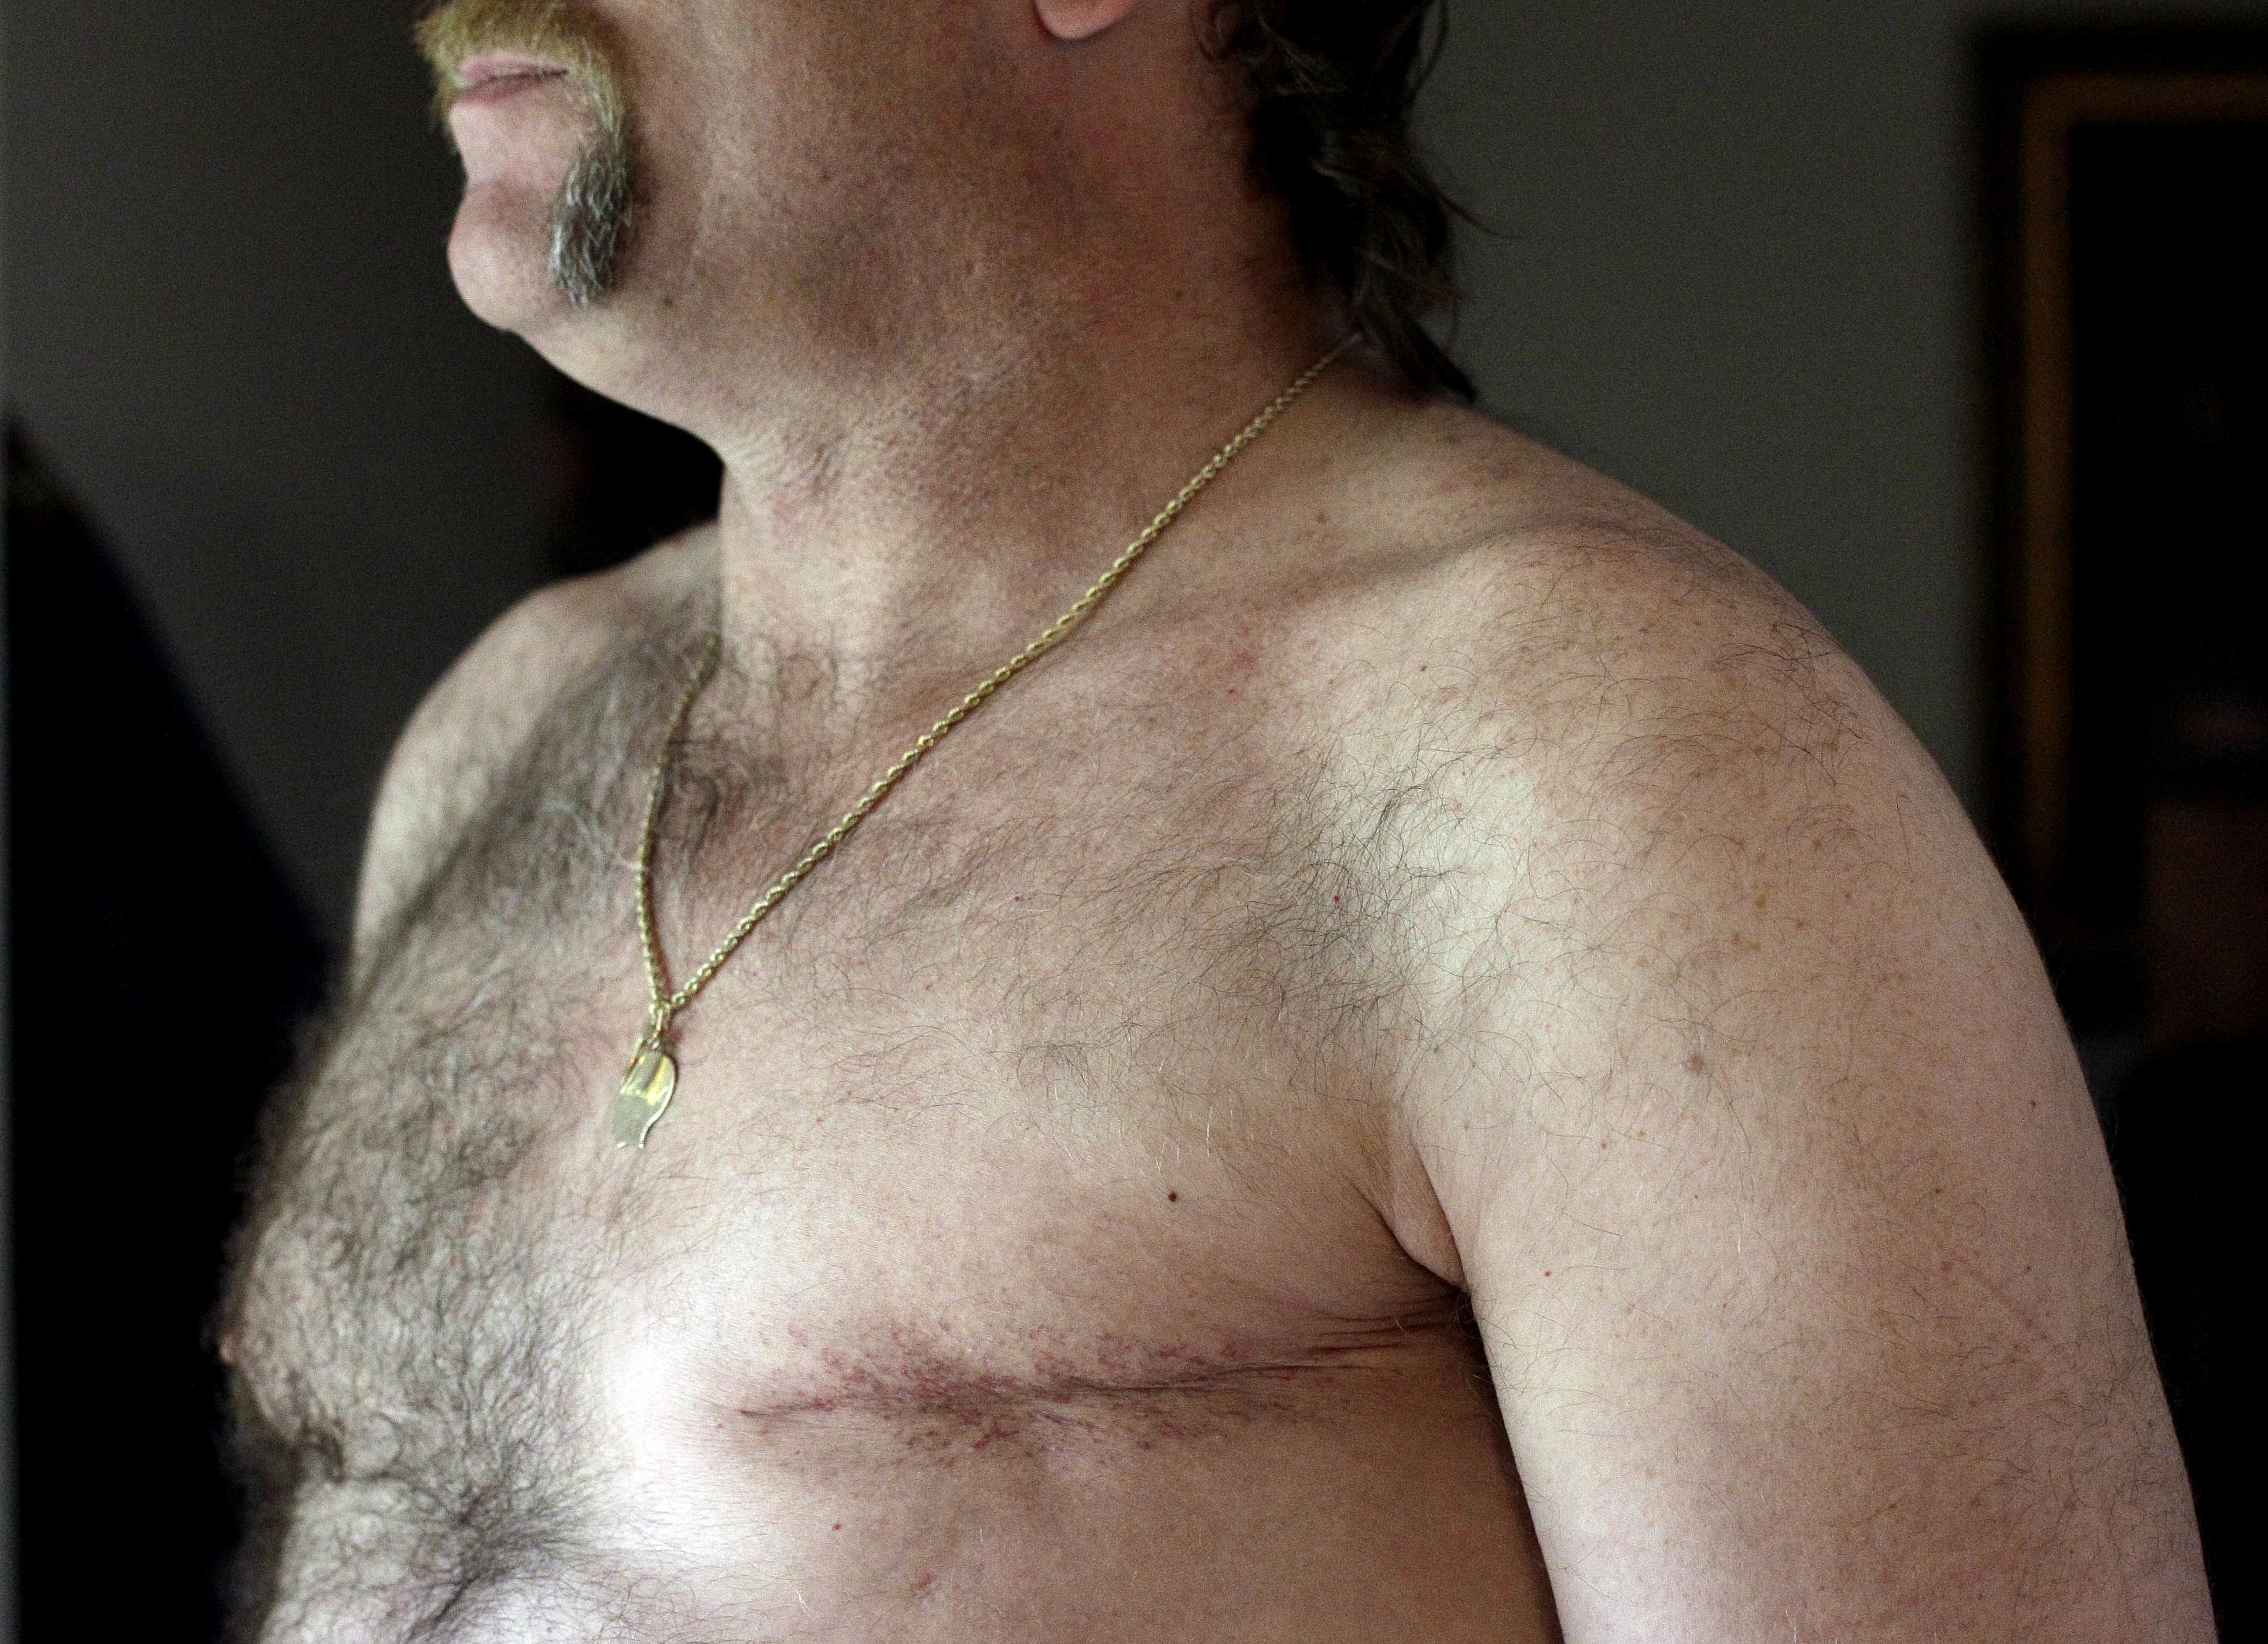 Double mastectomies for men with breast cancer on the rise